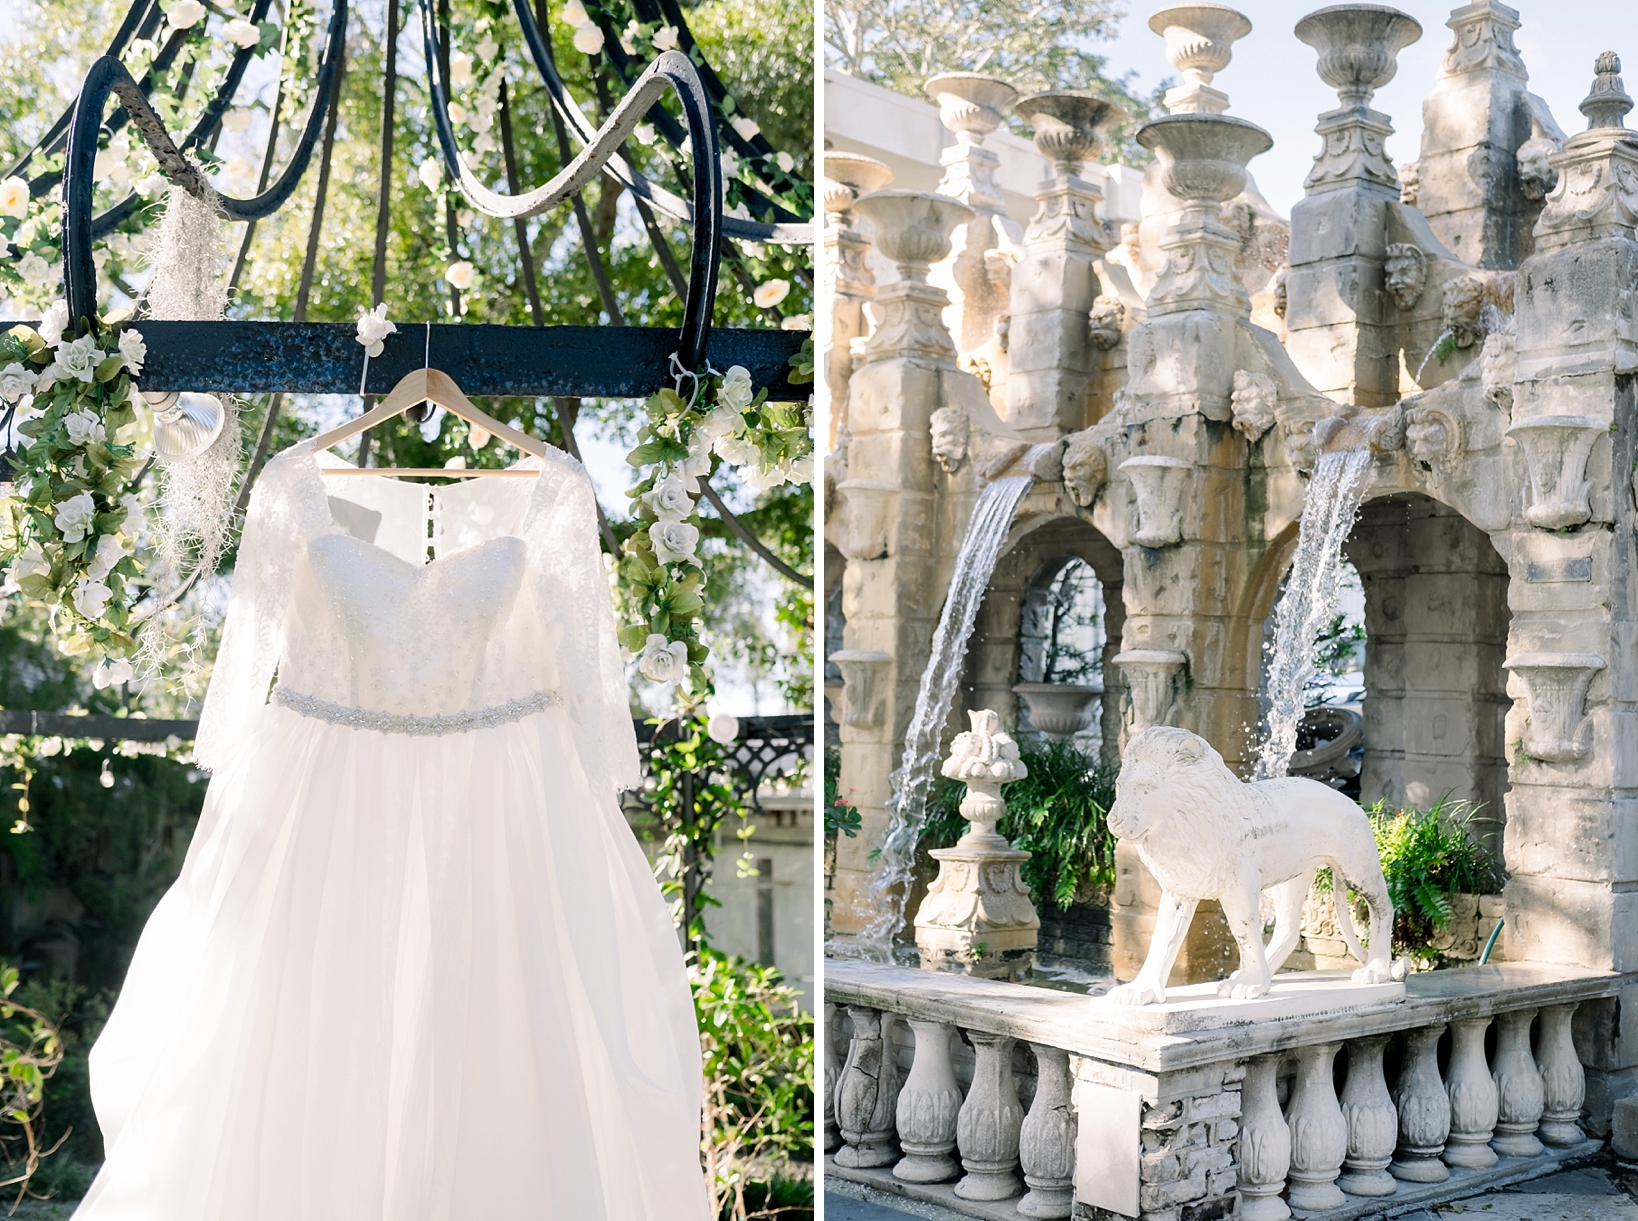 The Bride's wedding dress hanging on an iron pergola and a detail shot of the fountains outside the kapok tree by sarahben.com